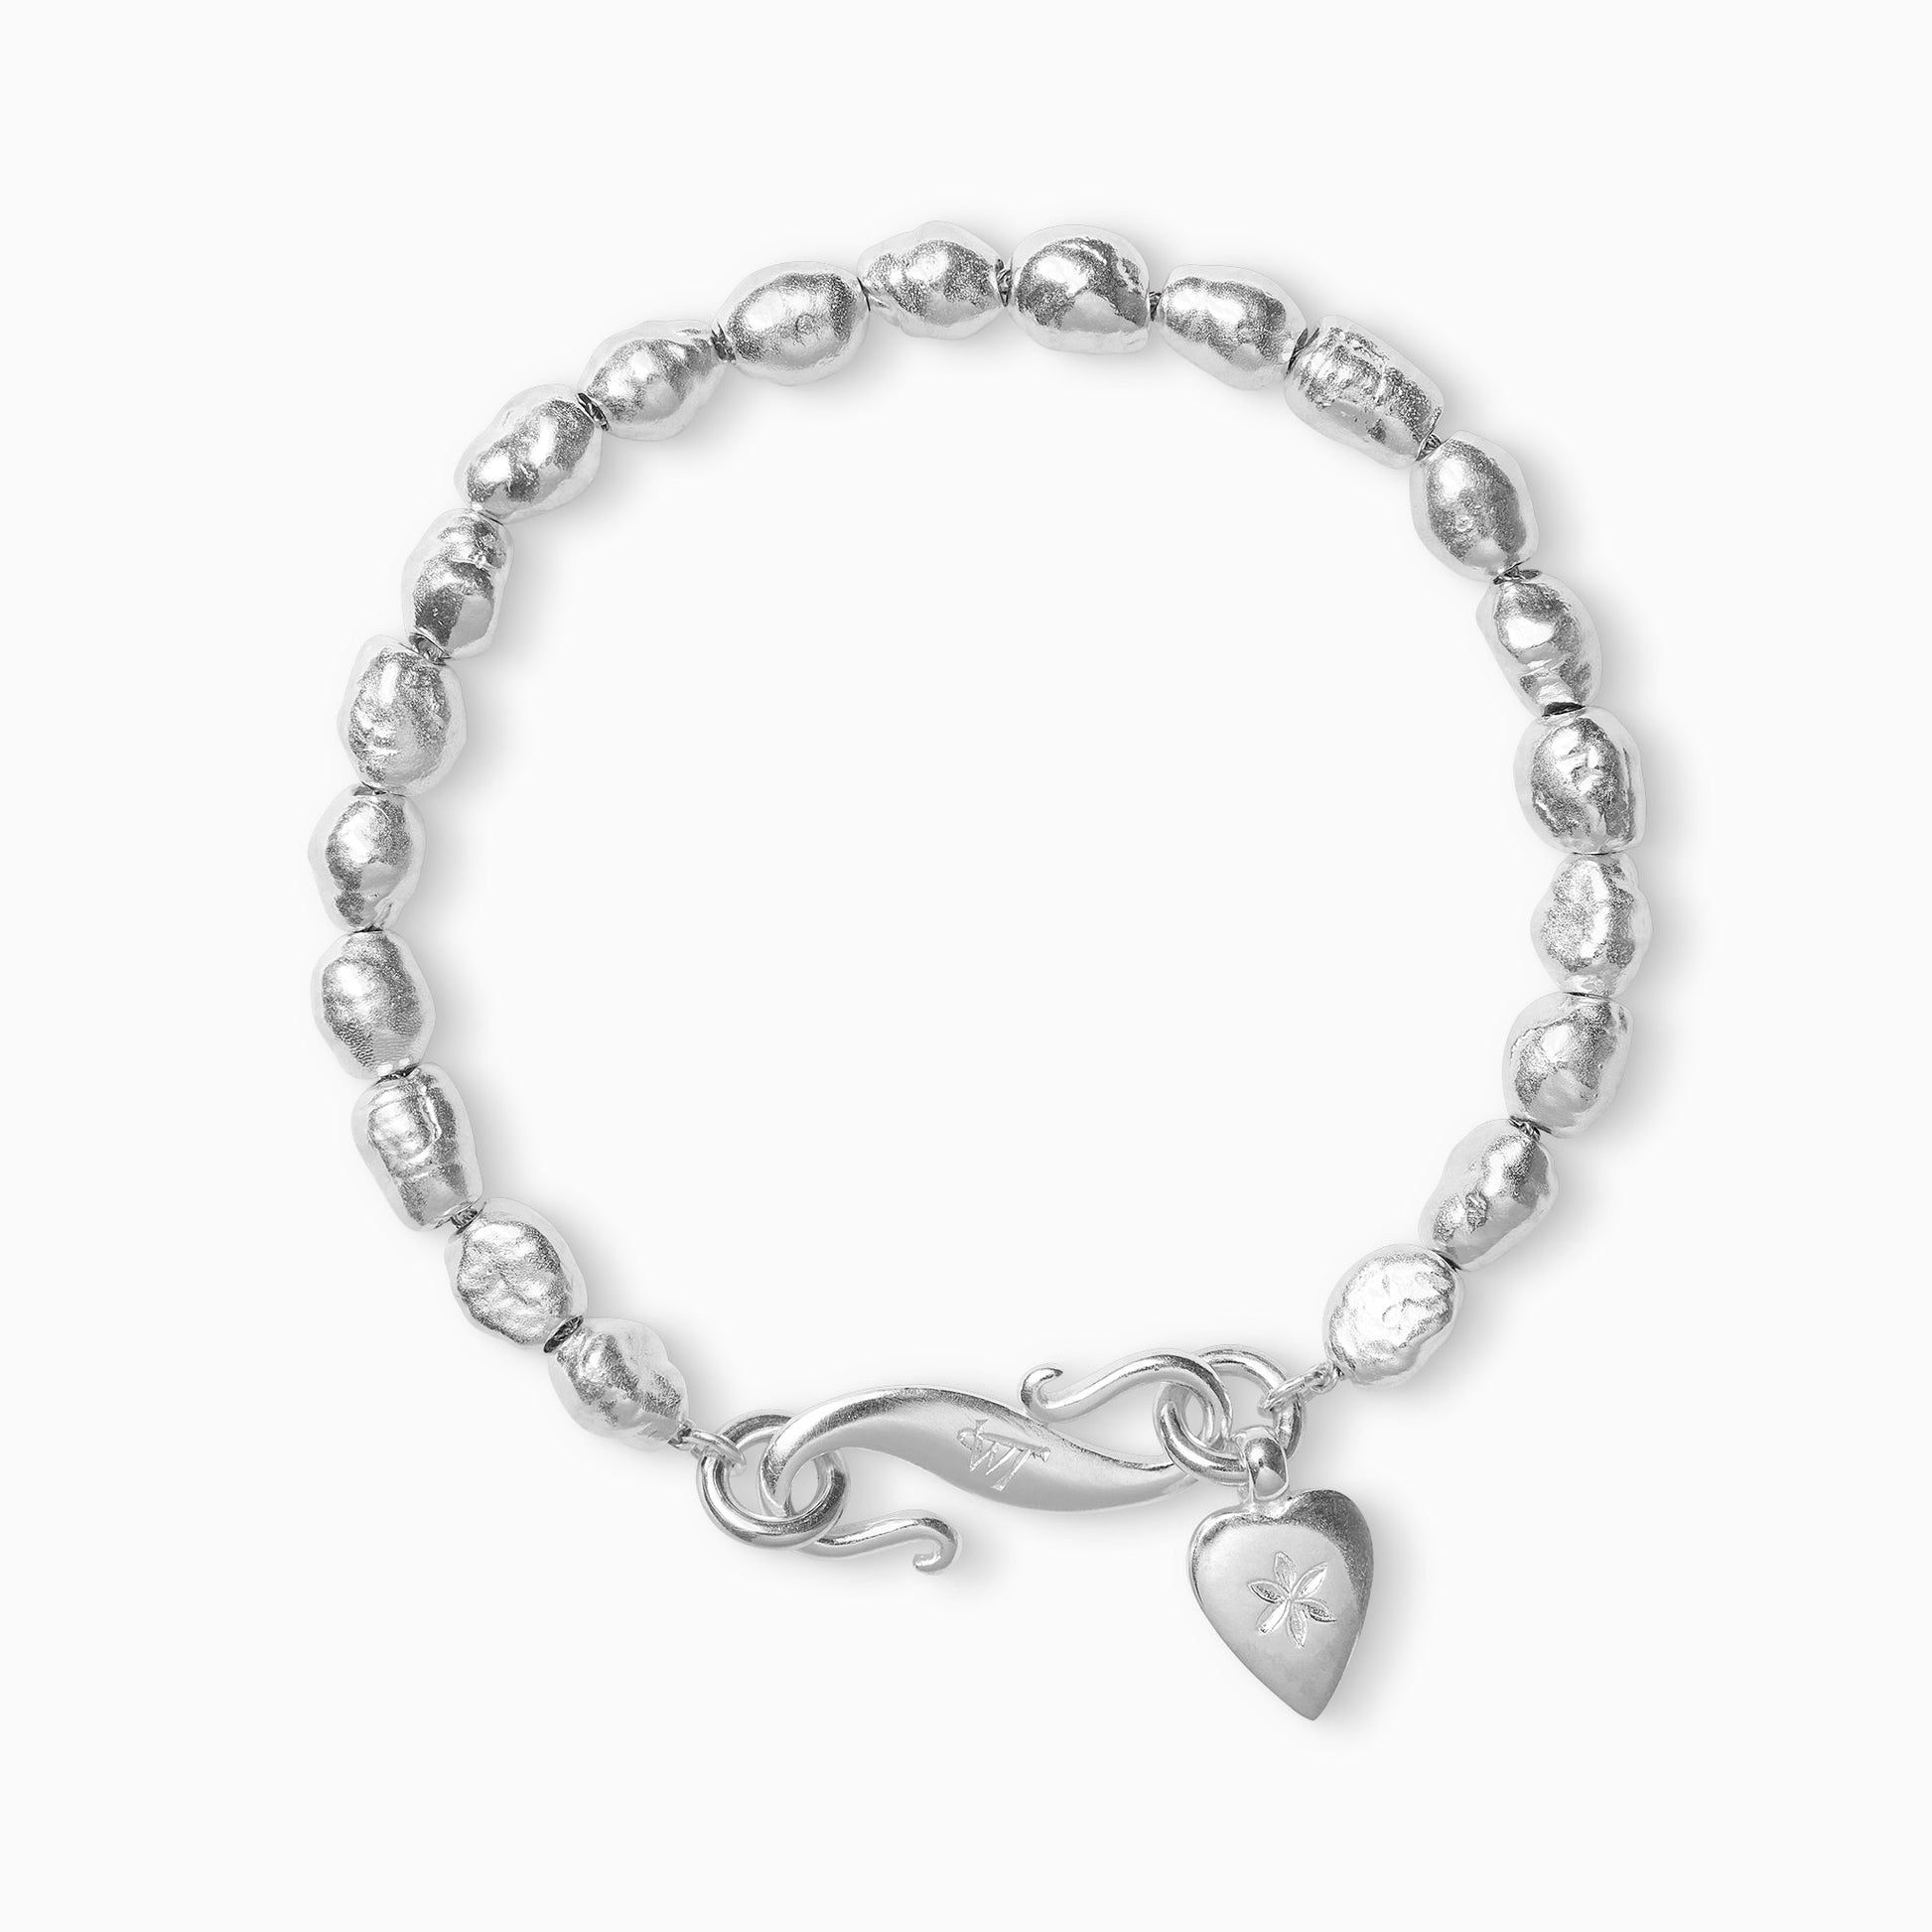 A recycled Silver bracelet of handmade irregular pearl shaped textured beads with a smooth heart shaped charm engraved with a 6 petal flower and our signature ’S’ clasp.  Bracelet length 210mm.. Beads varying approximately 8mm x 6mm.